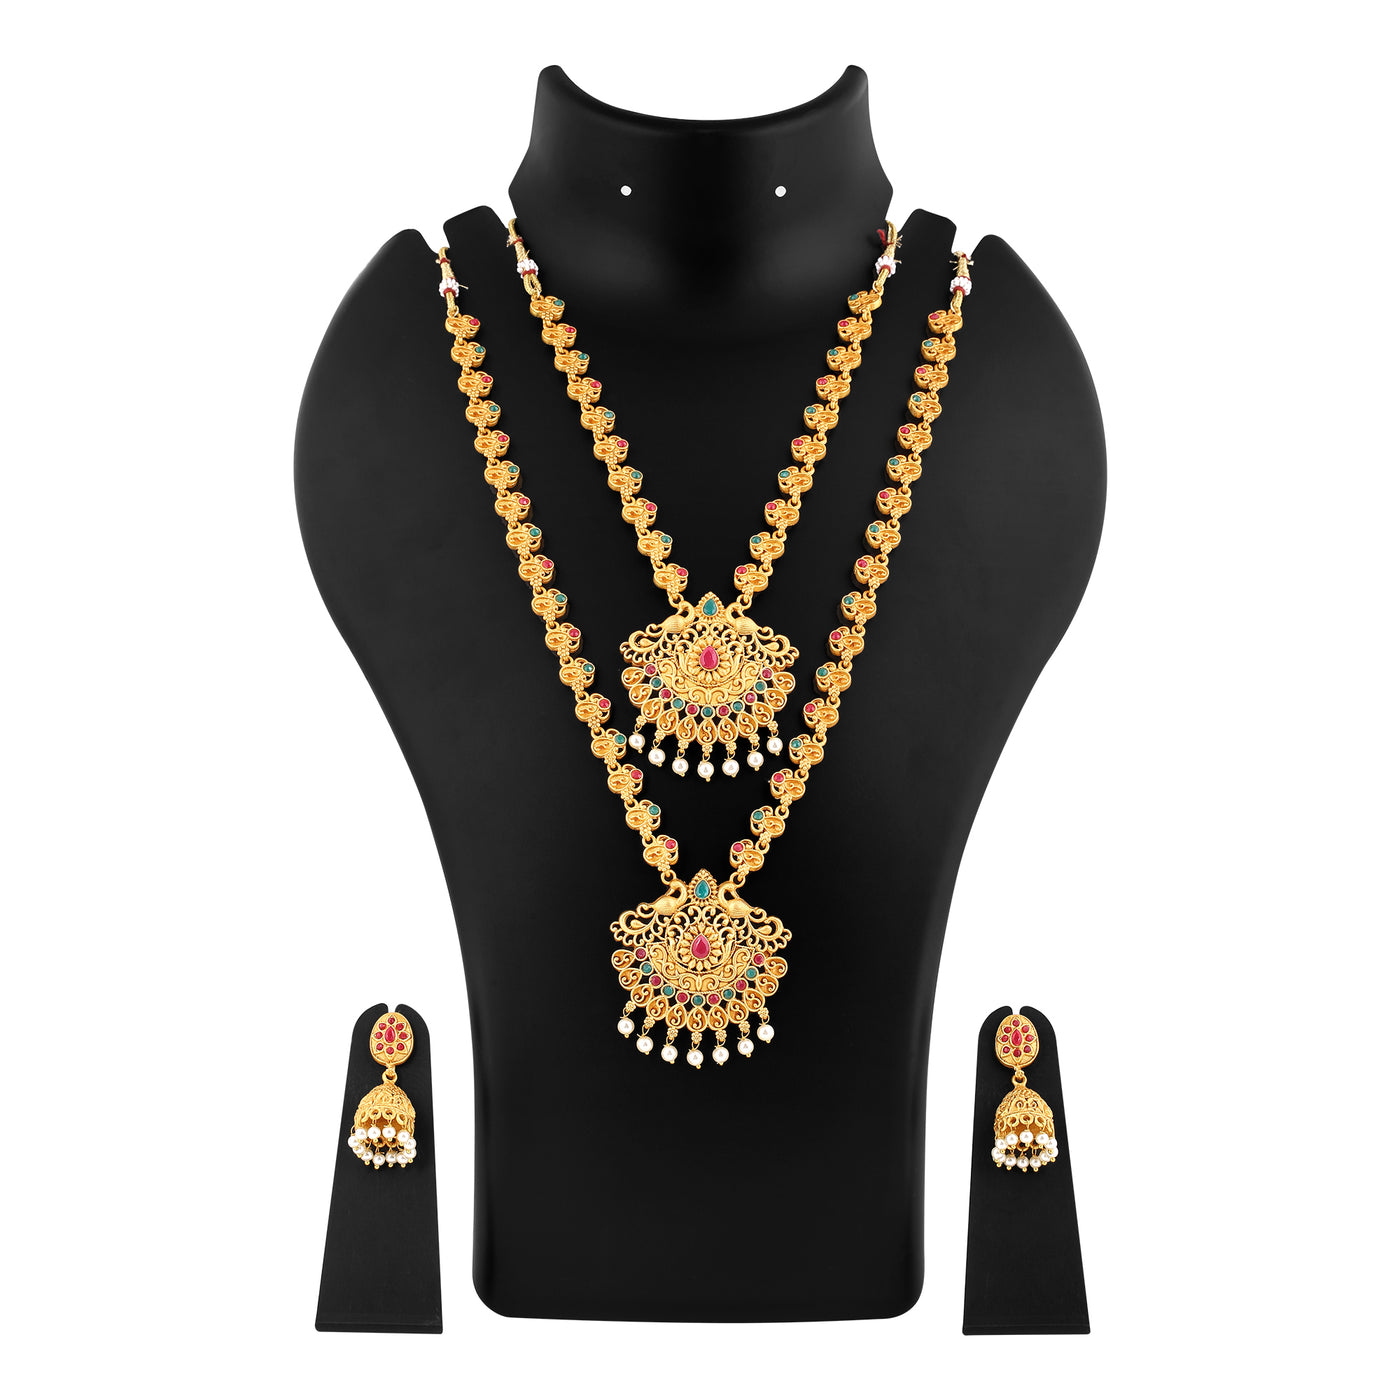 Estele Gold Plated Gorgeous Peacock Designer Necklace Set with Crystals and Pearls for Women